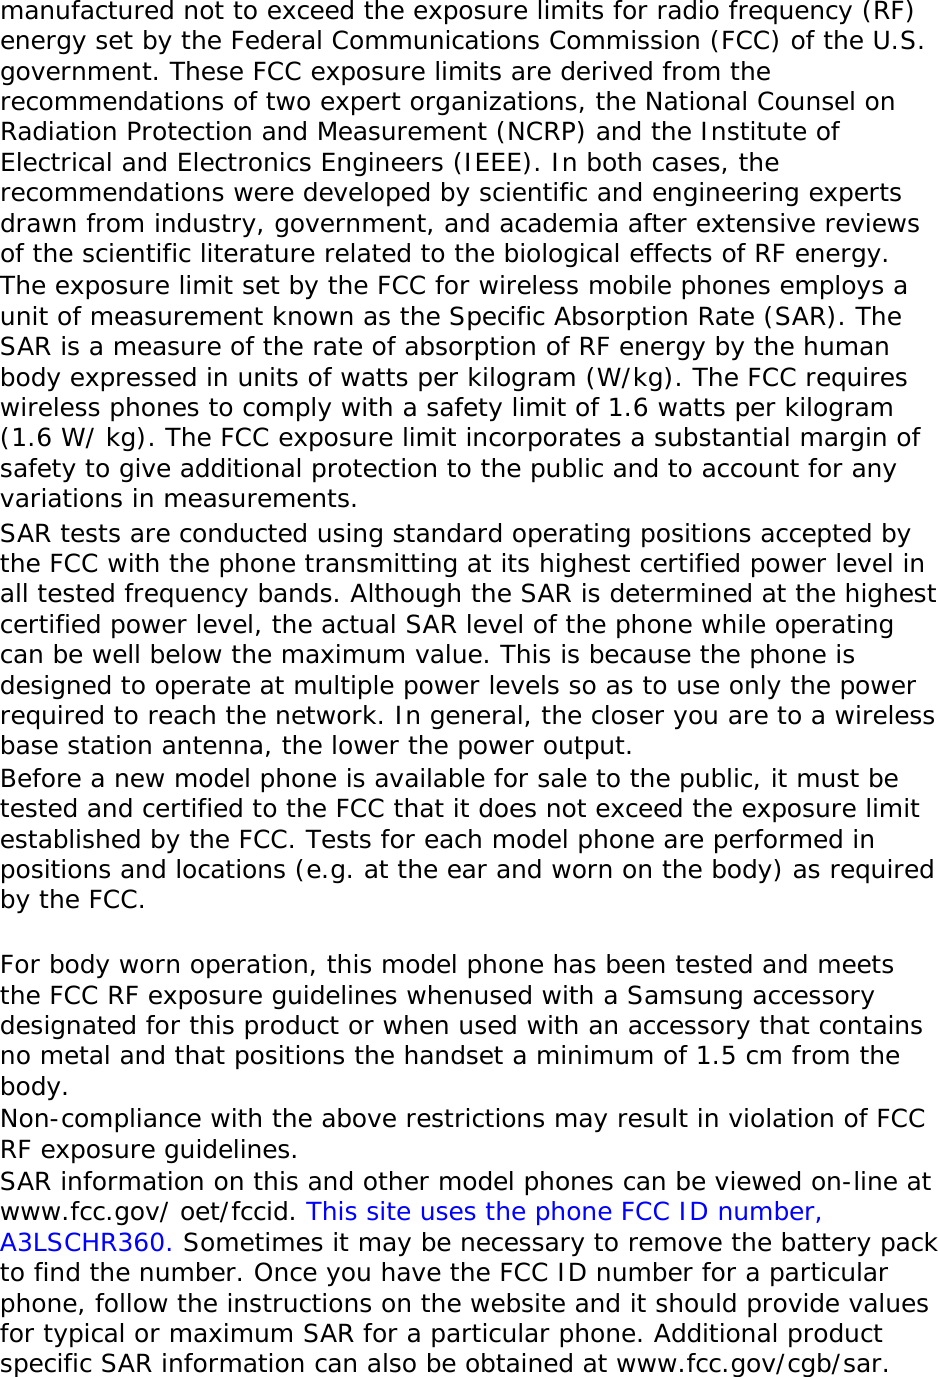 manufactured not to exceed the exposure limits for radio frequency (RF) energy set by the Federal Communications Commission (FCC) of the U.S. government. These FCC exposure limits are derived from the recommendations of two expert organizations, the National Counsel on Radiation Protection and Measurement (NCRP) and the Institute of Electrical and Electronics Engineers (IEEE). In both cases, the recommendations were developed by scientific and engineering experts drawn from industry, government, and academia after extensive reviews of the scientific literature related to the biological effects of RF energy. The exposure limit set by the FCC for wireless mobile phones employs a unit of measurement known as the Specific Absorption Rate (SAR). The SAR is a measure of the rate of absorption of RF energy by the human body expressed in units of watts per kilogram (W/kg). The FCC requires wireless phones to comply with a safety limit of 1.6 watts per kilogram (1.6 W/ kg). The FCC exposure limit incorporates a substantial margin of safety to give additional protection to the public and to account for any variations in measurements. SAR tests are conducted using standard operating positions accepted by the FCC with the phone transmitting at its highest certified power level in all tested frequency bands. Although the SAR is determined at the highest certified power level, the actual SAR level of the phone while operating can be well below the maximum value. This is because the phone is designed to operate at multiple power levels so as to use only the power required to reach the network. In general, the closer you are to a wireless base station antenna, the lower the power output. Before a new model phone is available for sale to the public, it must be tested and certified to the FCC that it does not exceed the exposure limit established by the FCC. Tests for each model phone are performed in positions and locations (e.g. at the ear and worn on the body) as required by the FCC.    For body worn operation, this model phone has been tested and meets the FCC RF exposure guidelines whenused with a Samsung accessory designated for this product or when used with an accessory that contains no metal and that positions the handset a minimum of 1.5 cm from the body.  Non-compliance with the above restrictions may result in violation of FCC RF exposure guidelines. SAR information on this and other model phones can be viewed on-line at www.fcc.gov/ oet/fccid. This site uses the phone FCC ID number, A3LSCHR360. Sometimes it may be necessary to remove the battery pack to find the number. Once you have the FCC ID number for a particular phone, follow the instructions on the website and it should provide values for typical or maximum SAR for a particular phone. Additional product specific SAR information can also be obtained at www.fcc.gov/cgb/sar. 